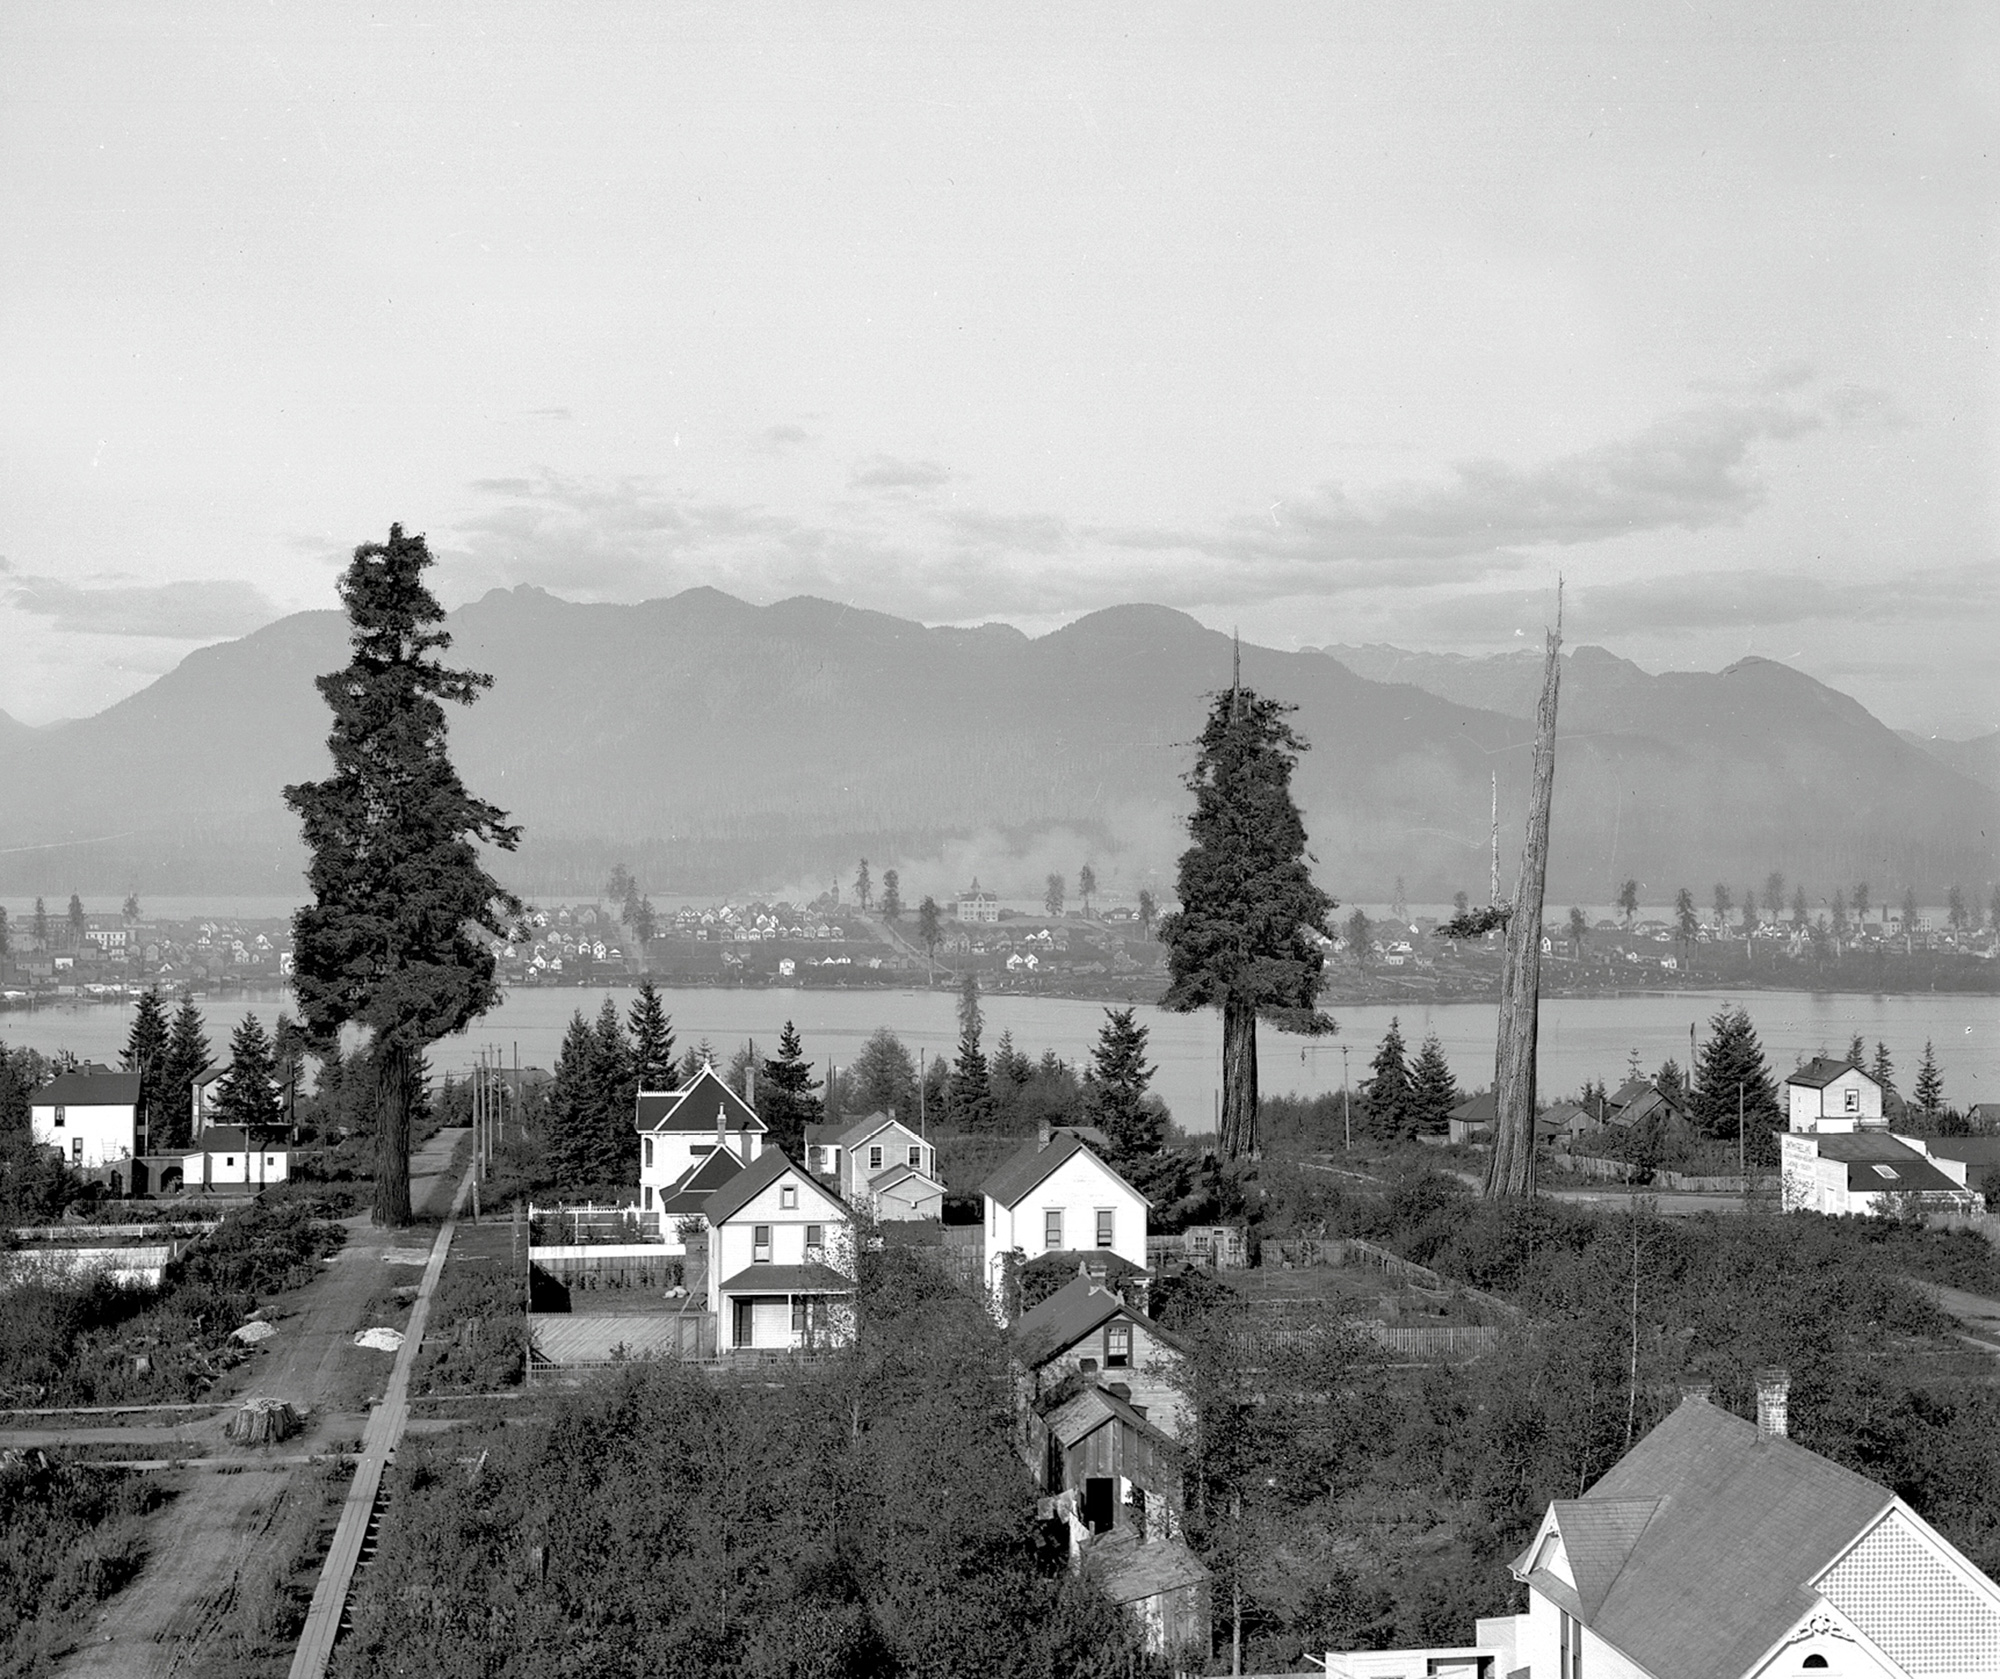 A photograph titled “Roundabout Vancouver: Mount Pleasant, circa nineteen thirties.” It shows a neighborhood in the shadow of Mount Pleasant.